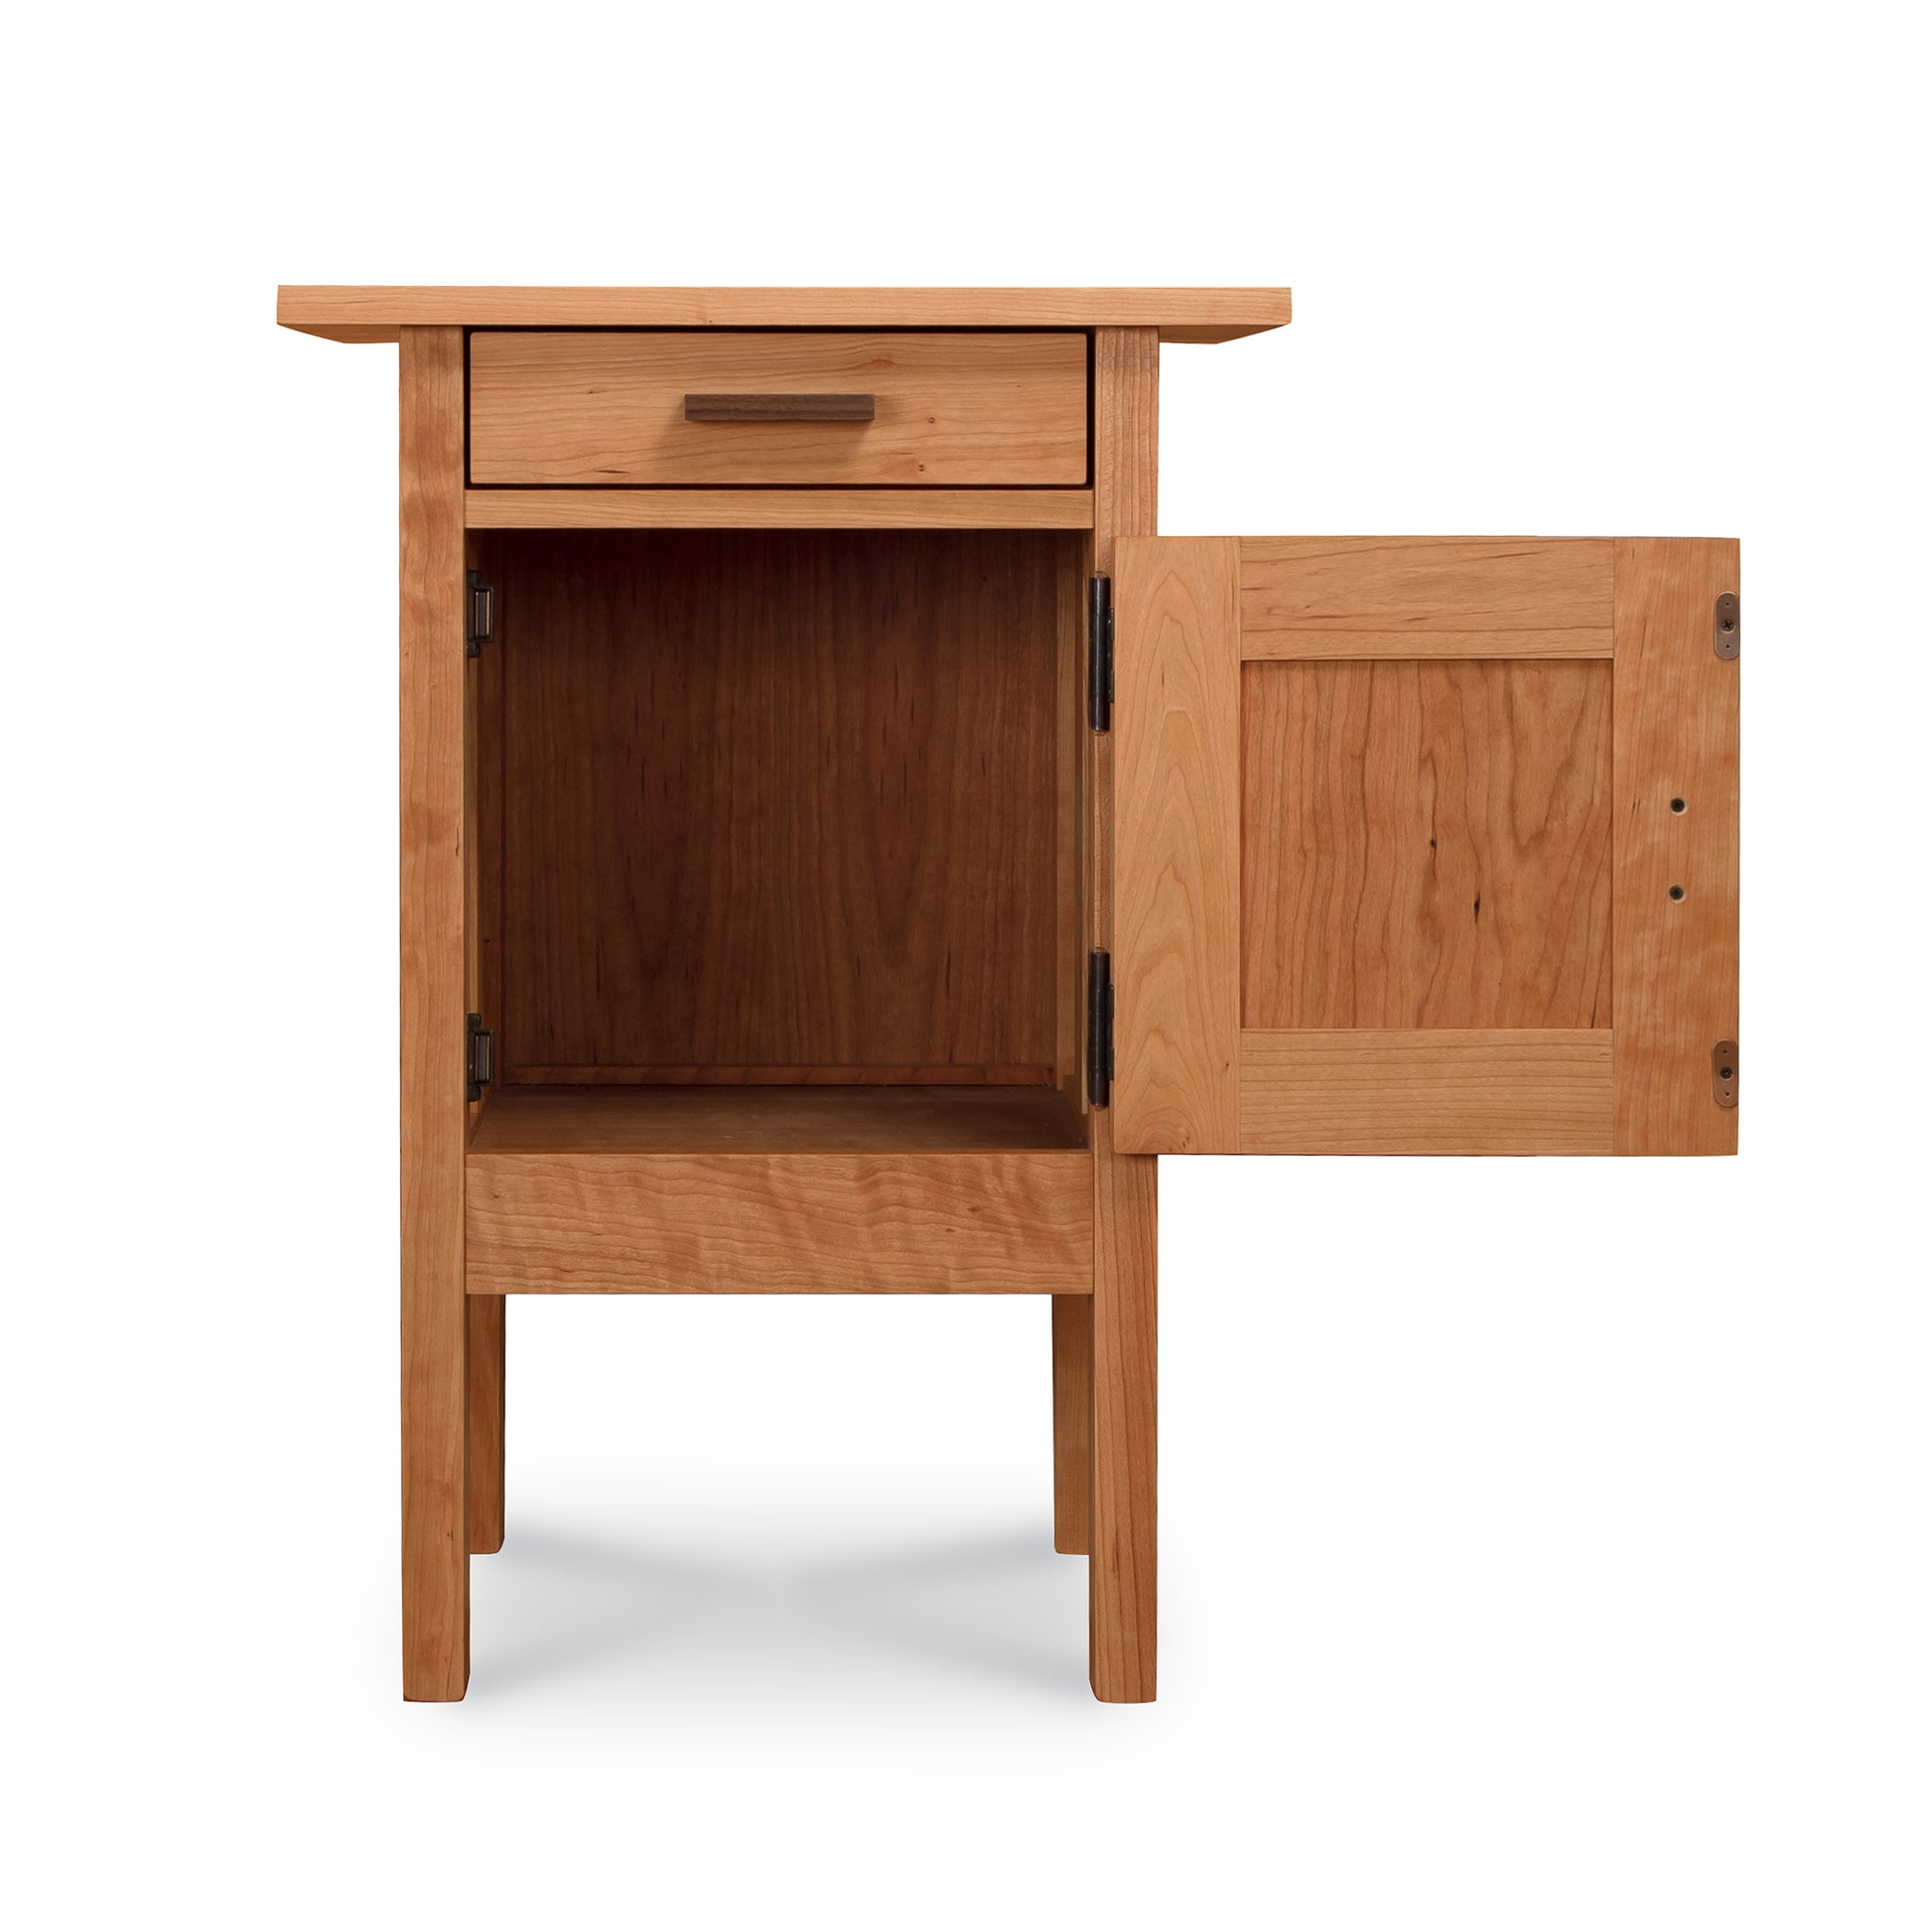 A small wooden Modern Craftsman 1-Drawer Nightstand with Door, crafted by Vermont Furniture Designs.